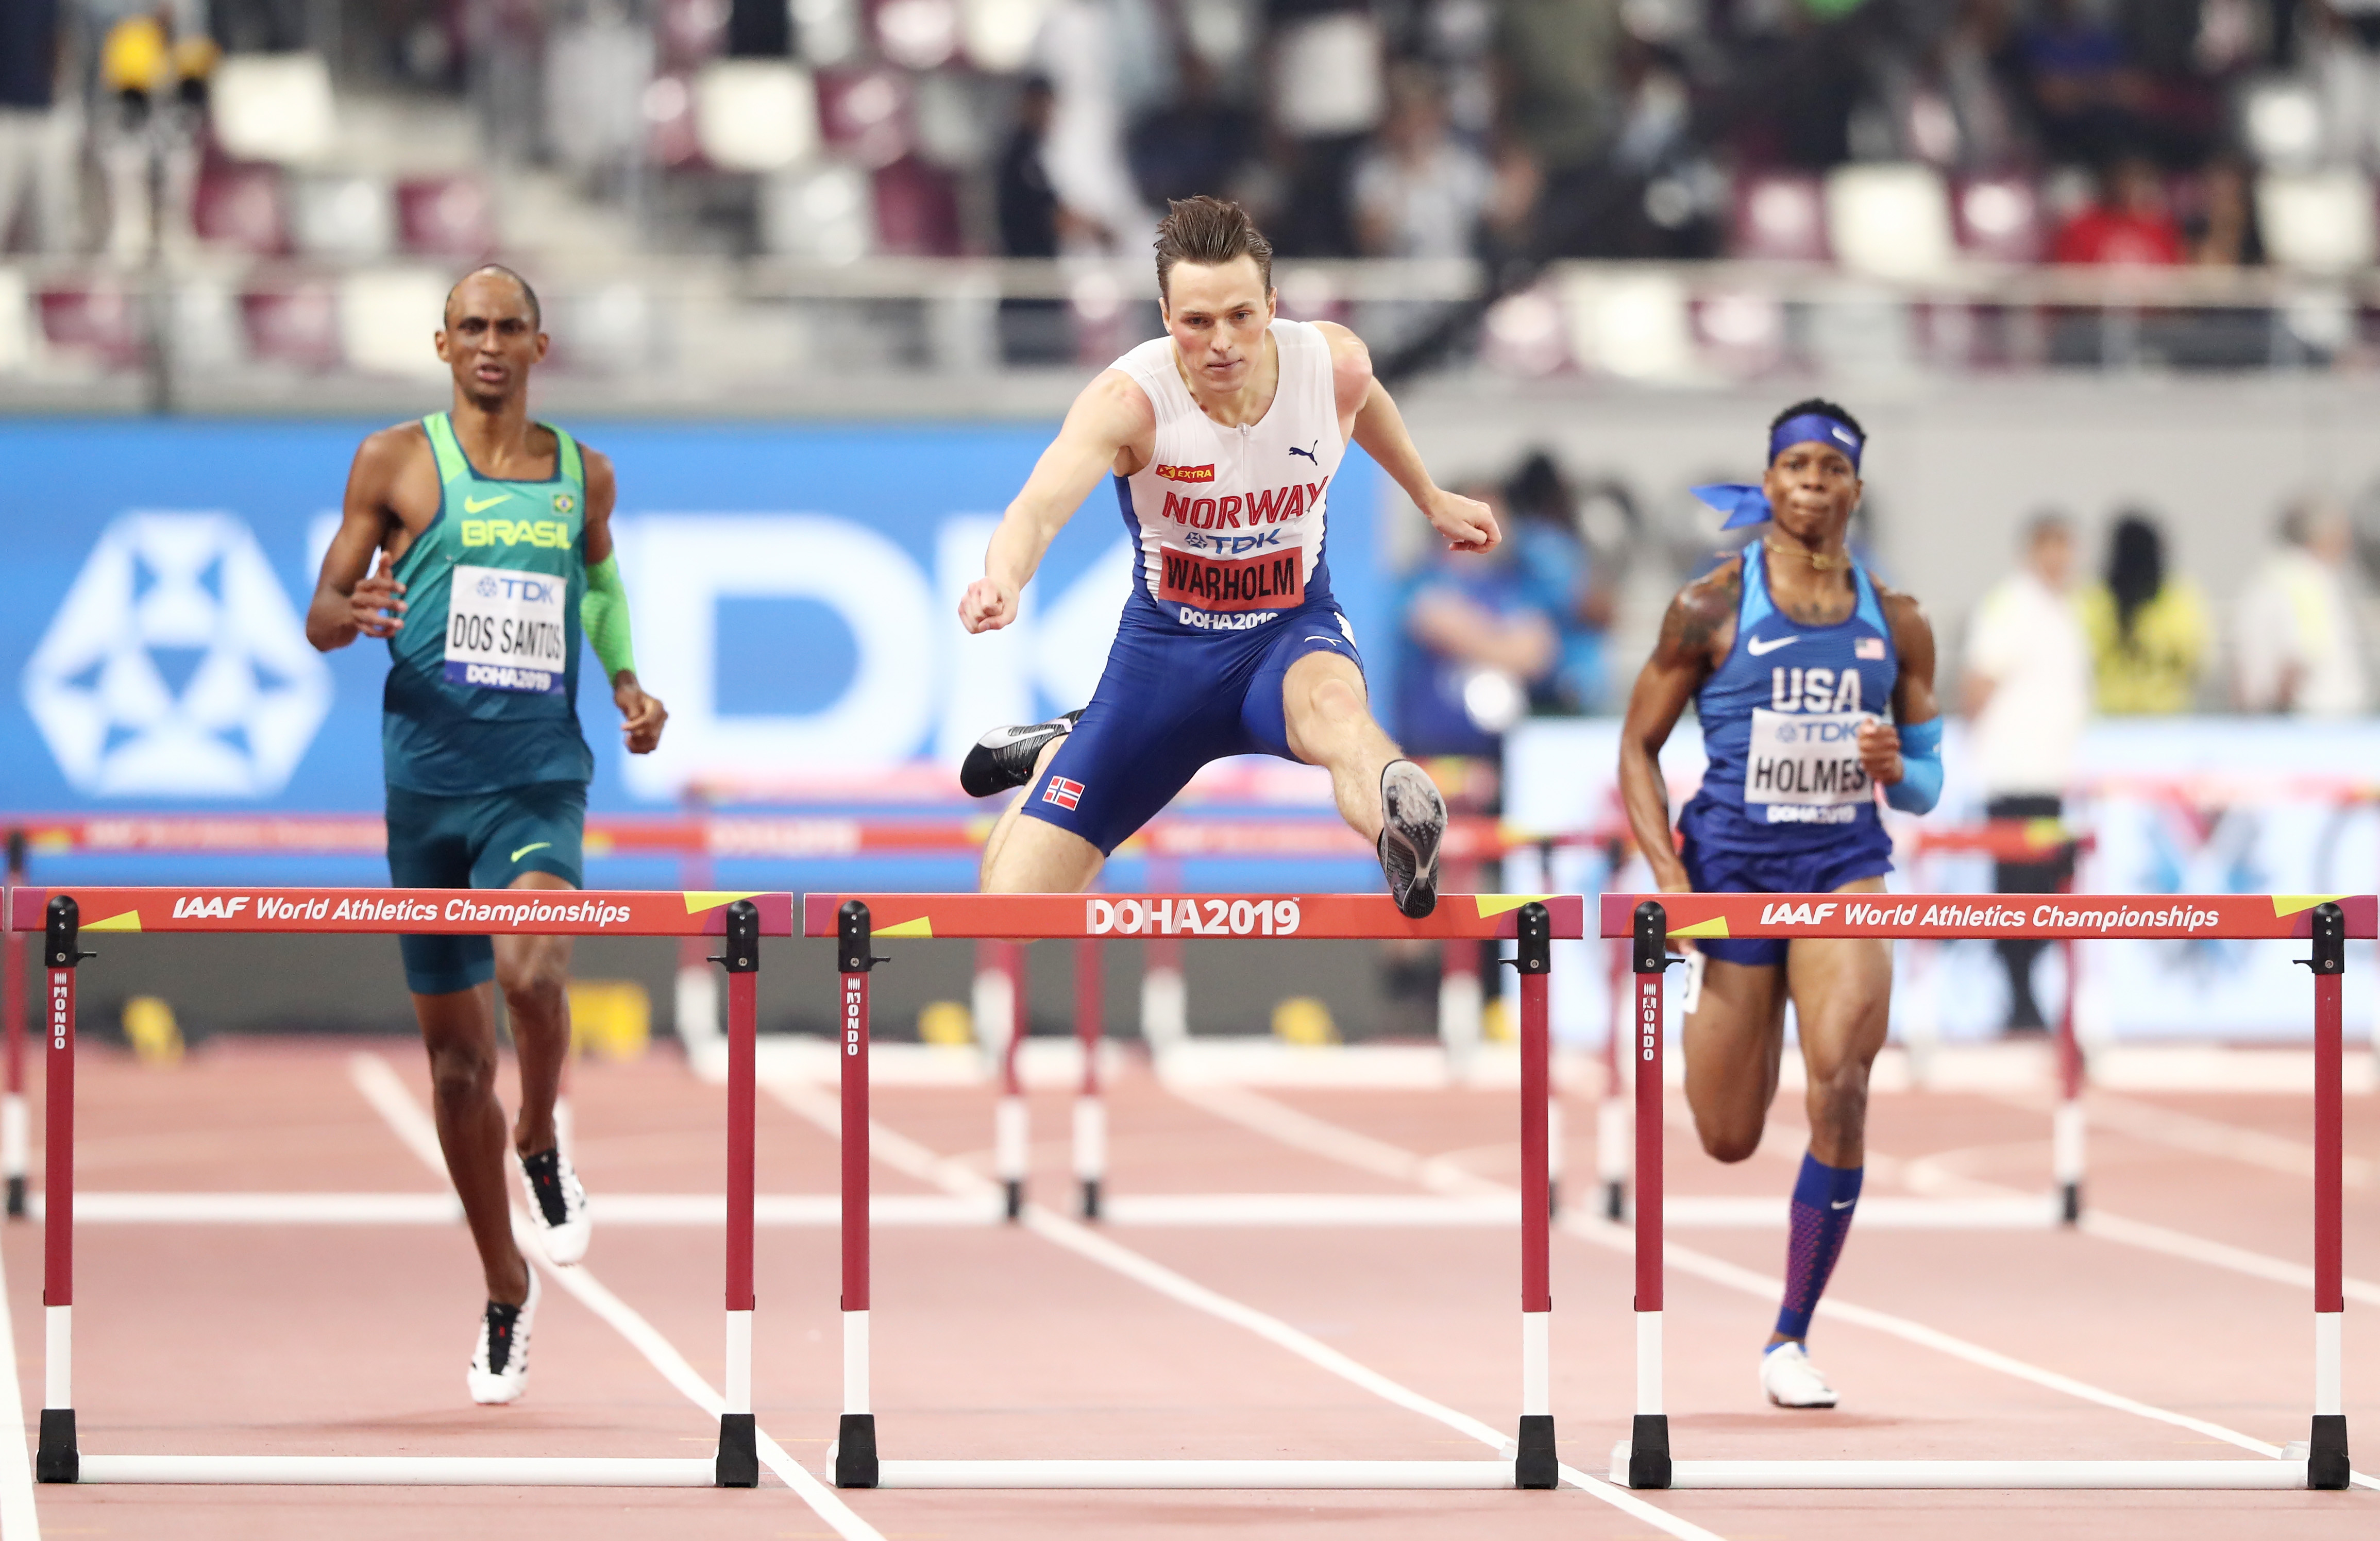 Warholm sets new world mark in 300mH